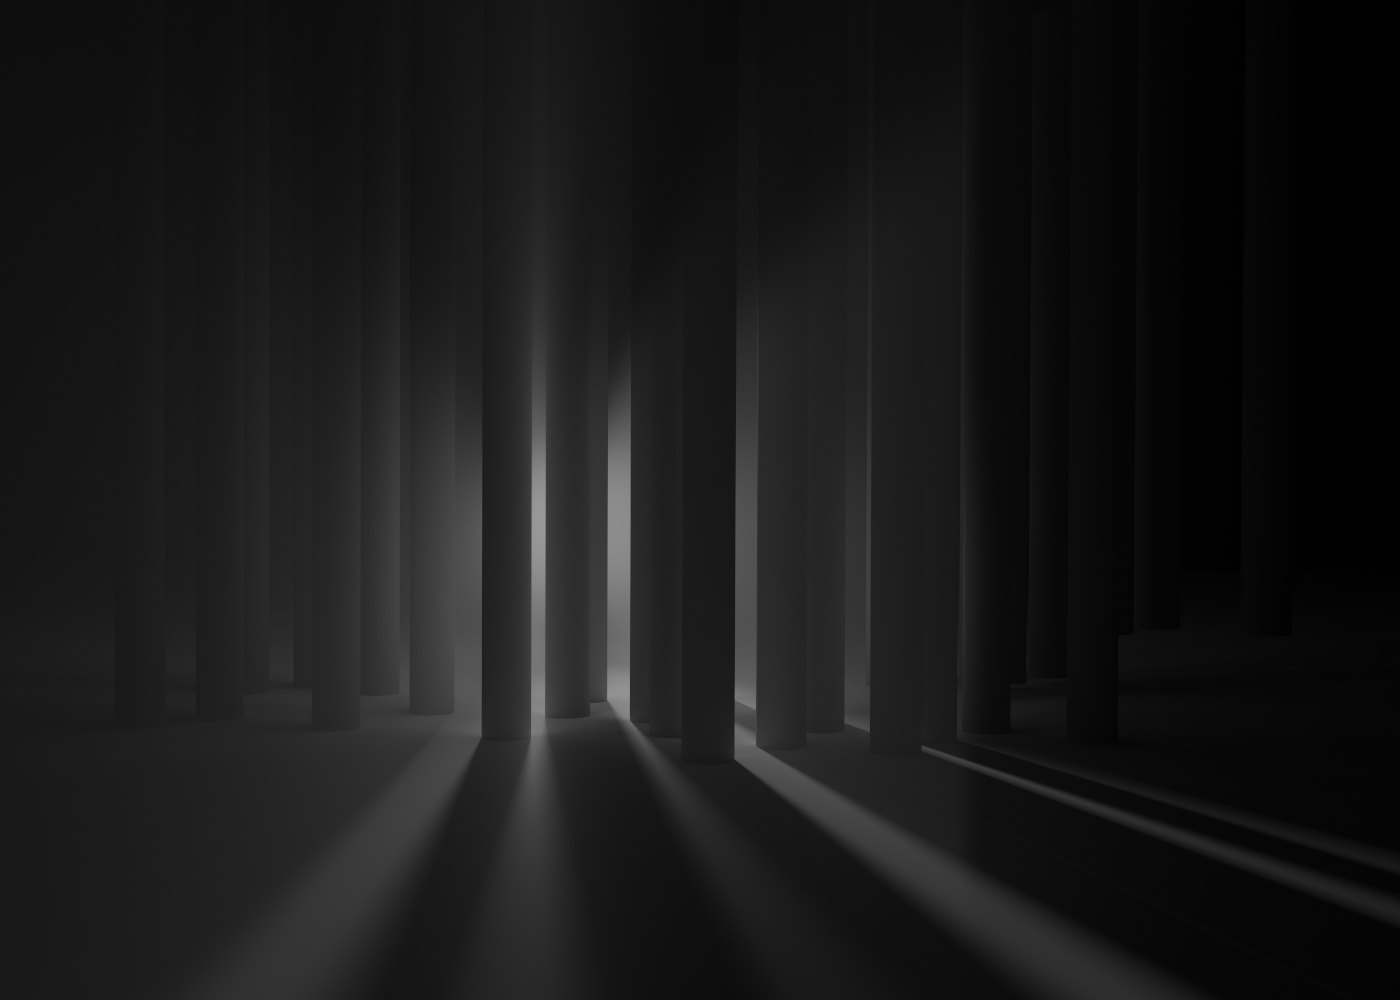 Virtual abstract scenery, Scenic abstract digital contemporary art, Raytracing, Computer-rendered image, 2018. Fine Art Print 70 x 50cm, mounted on Alu-Dibond®. Limited Edition 1/1. Many cylindrical pillars stand in darkness in front of the viewer and block the view of a large illuminated spot behind them.